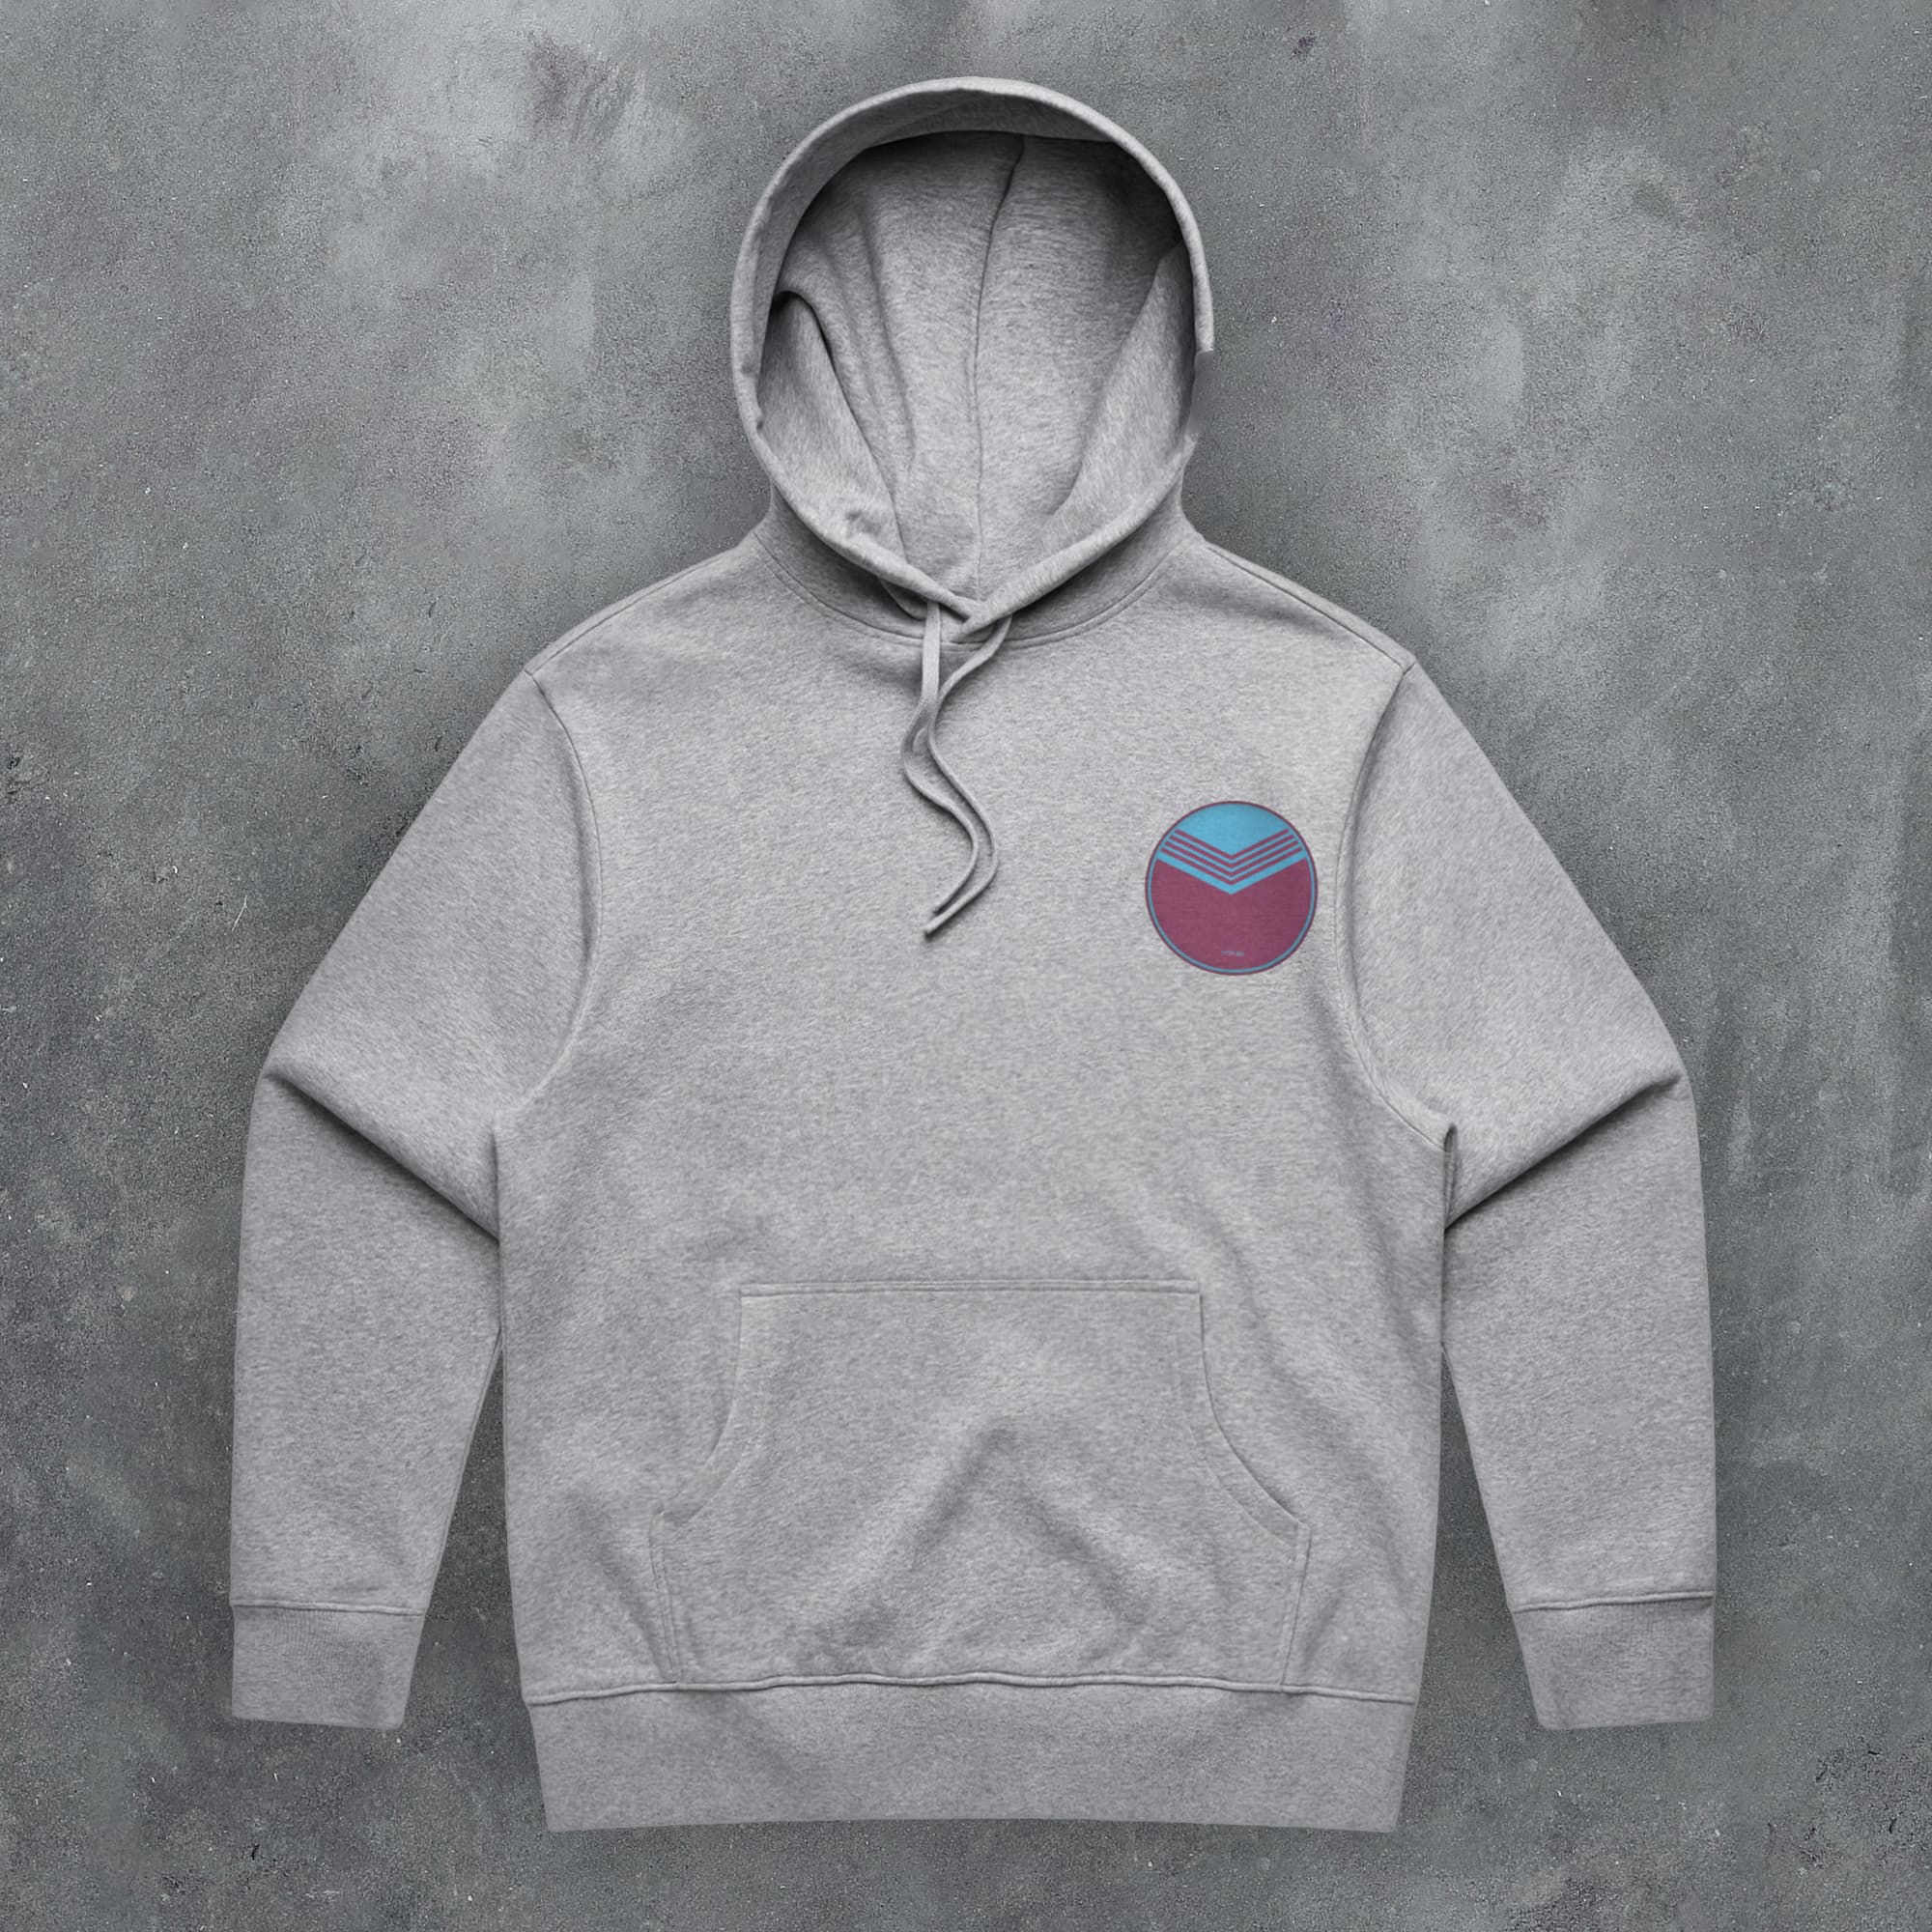 a grey hoodie with a blue and red circle on it